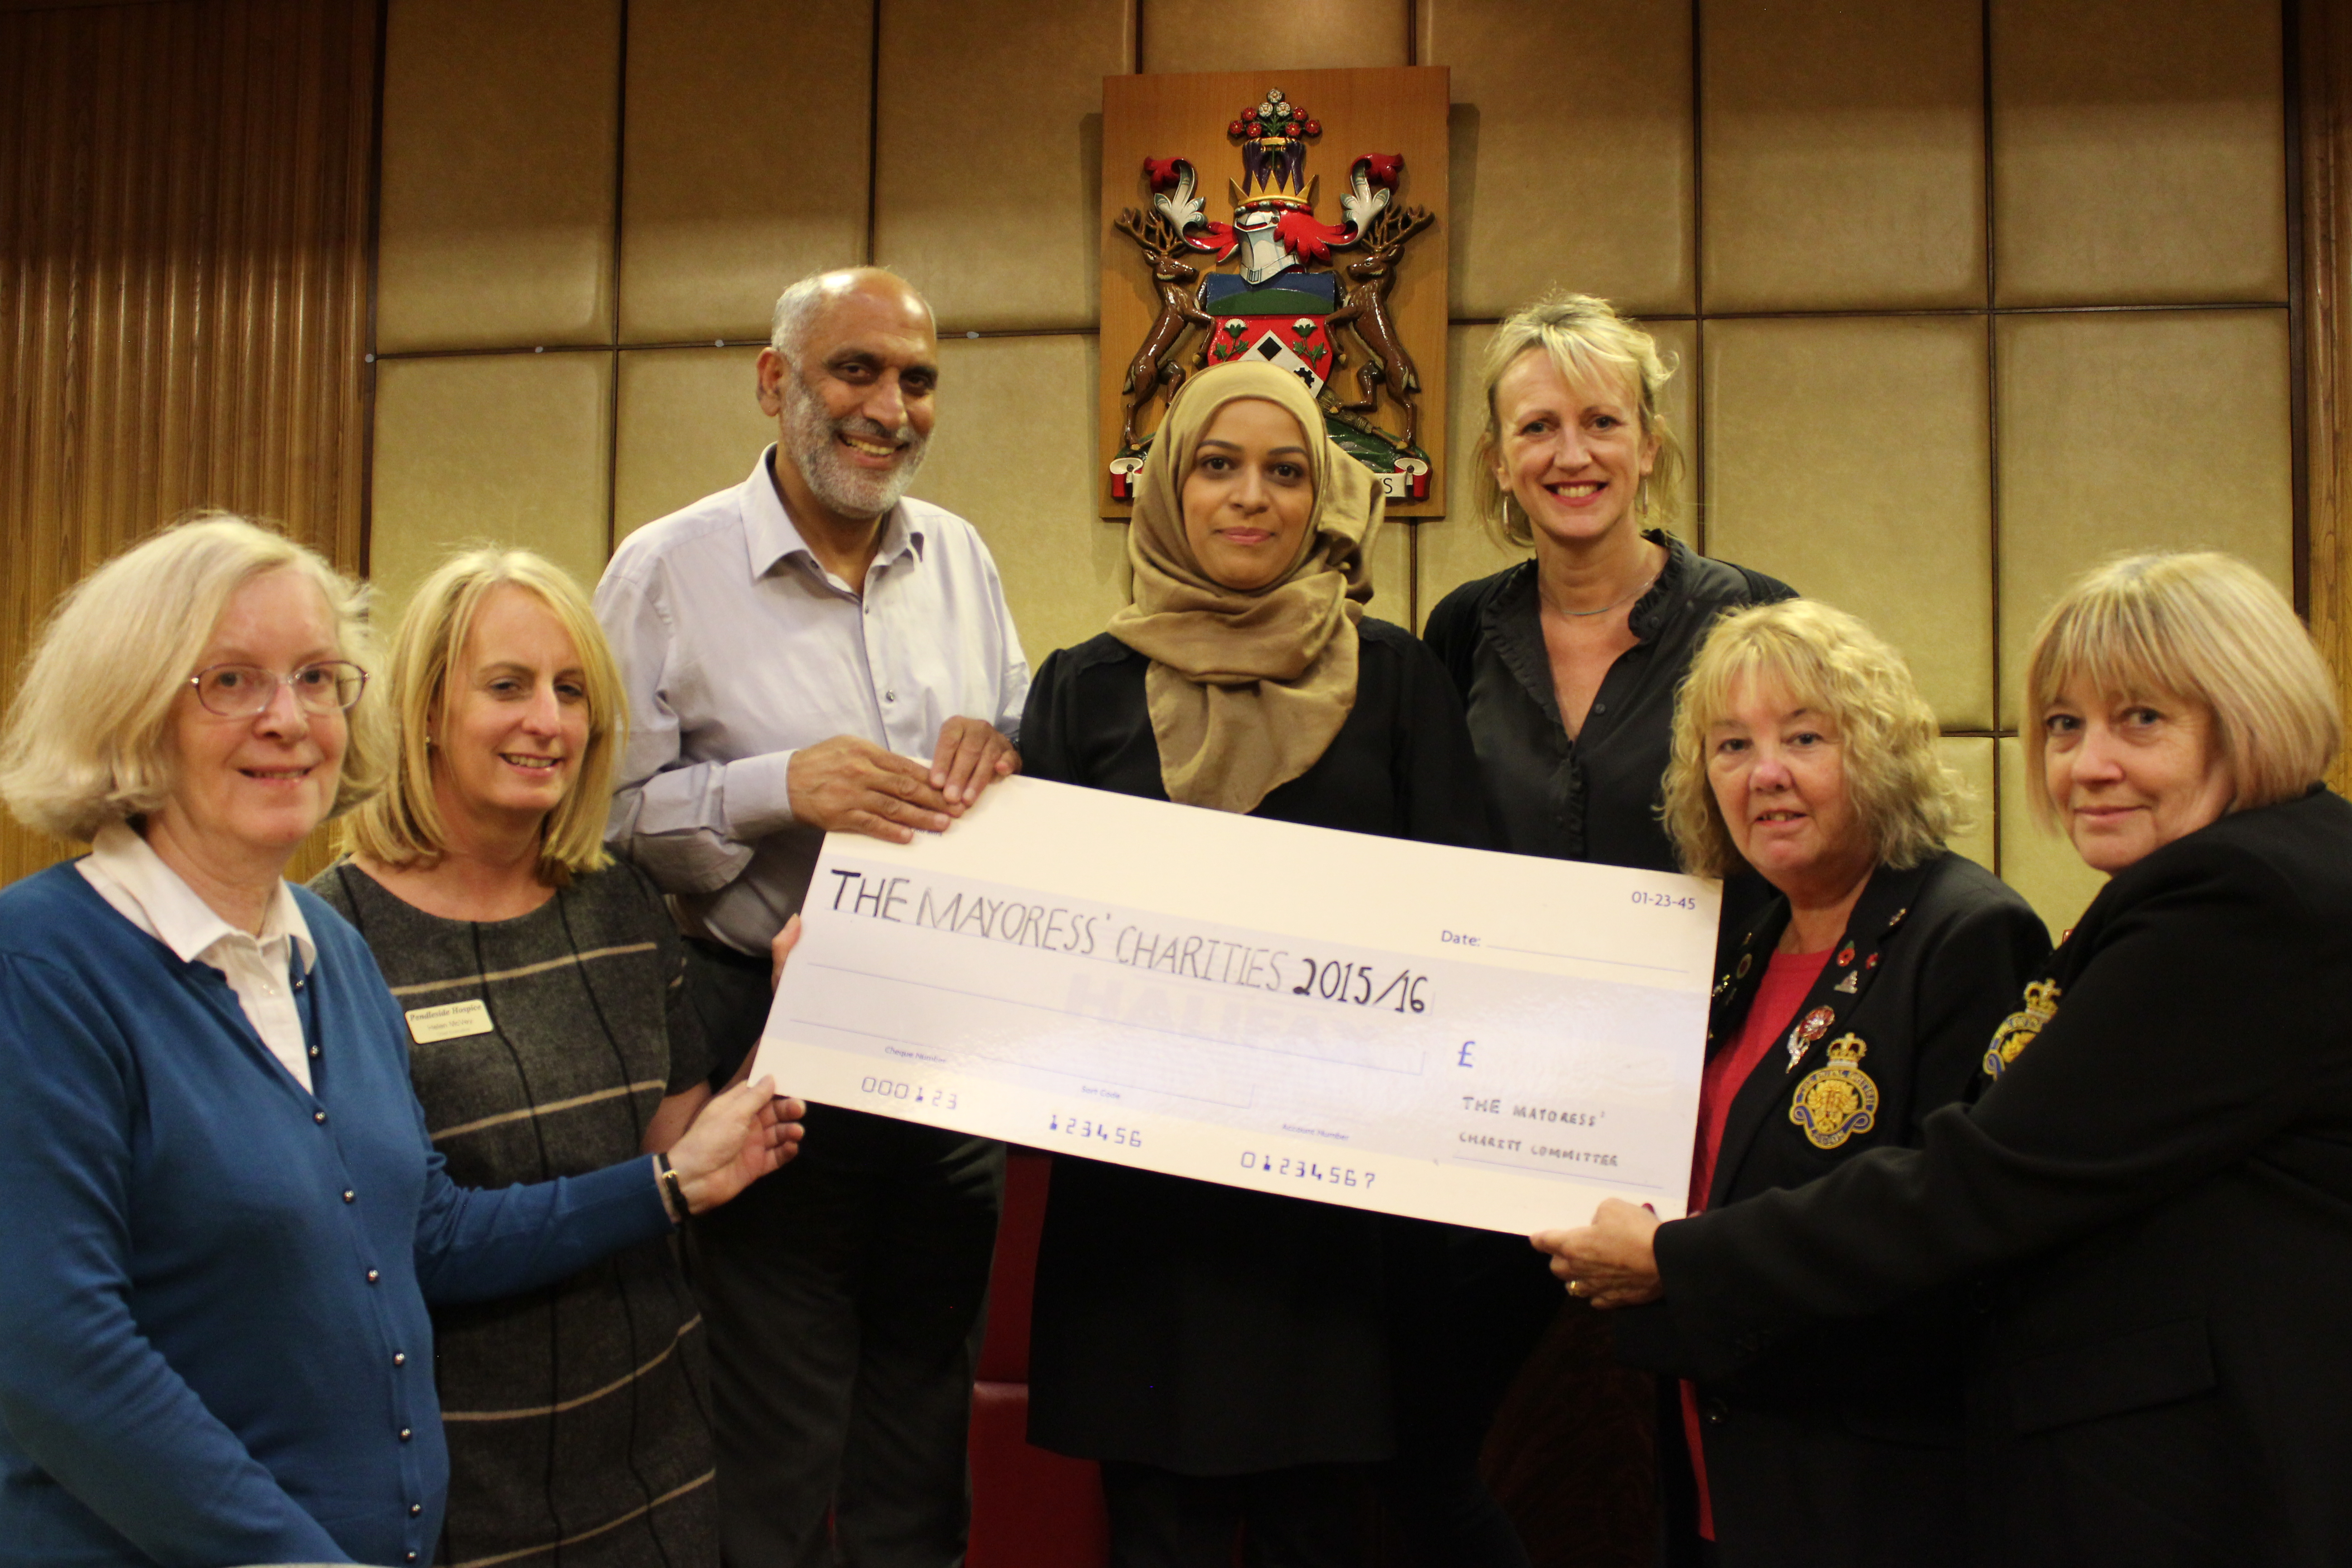 A photo of former Mayor & Mayoress charity cheque handovers